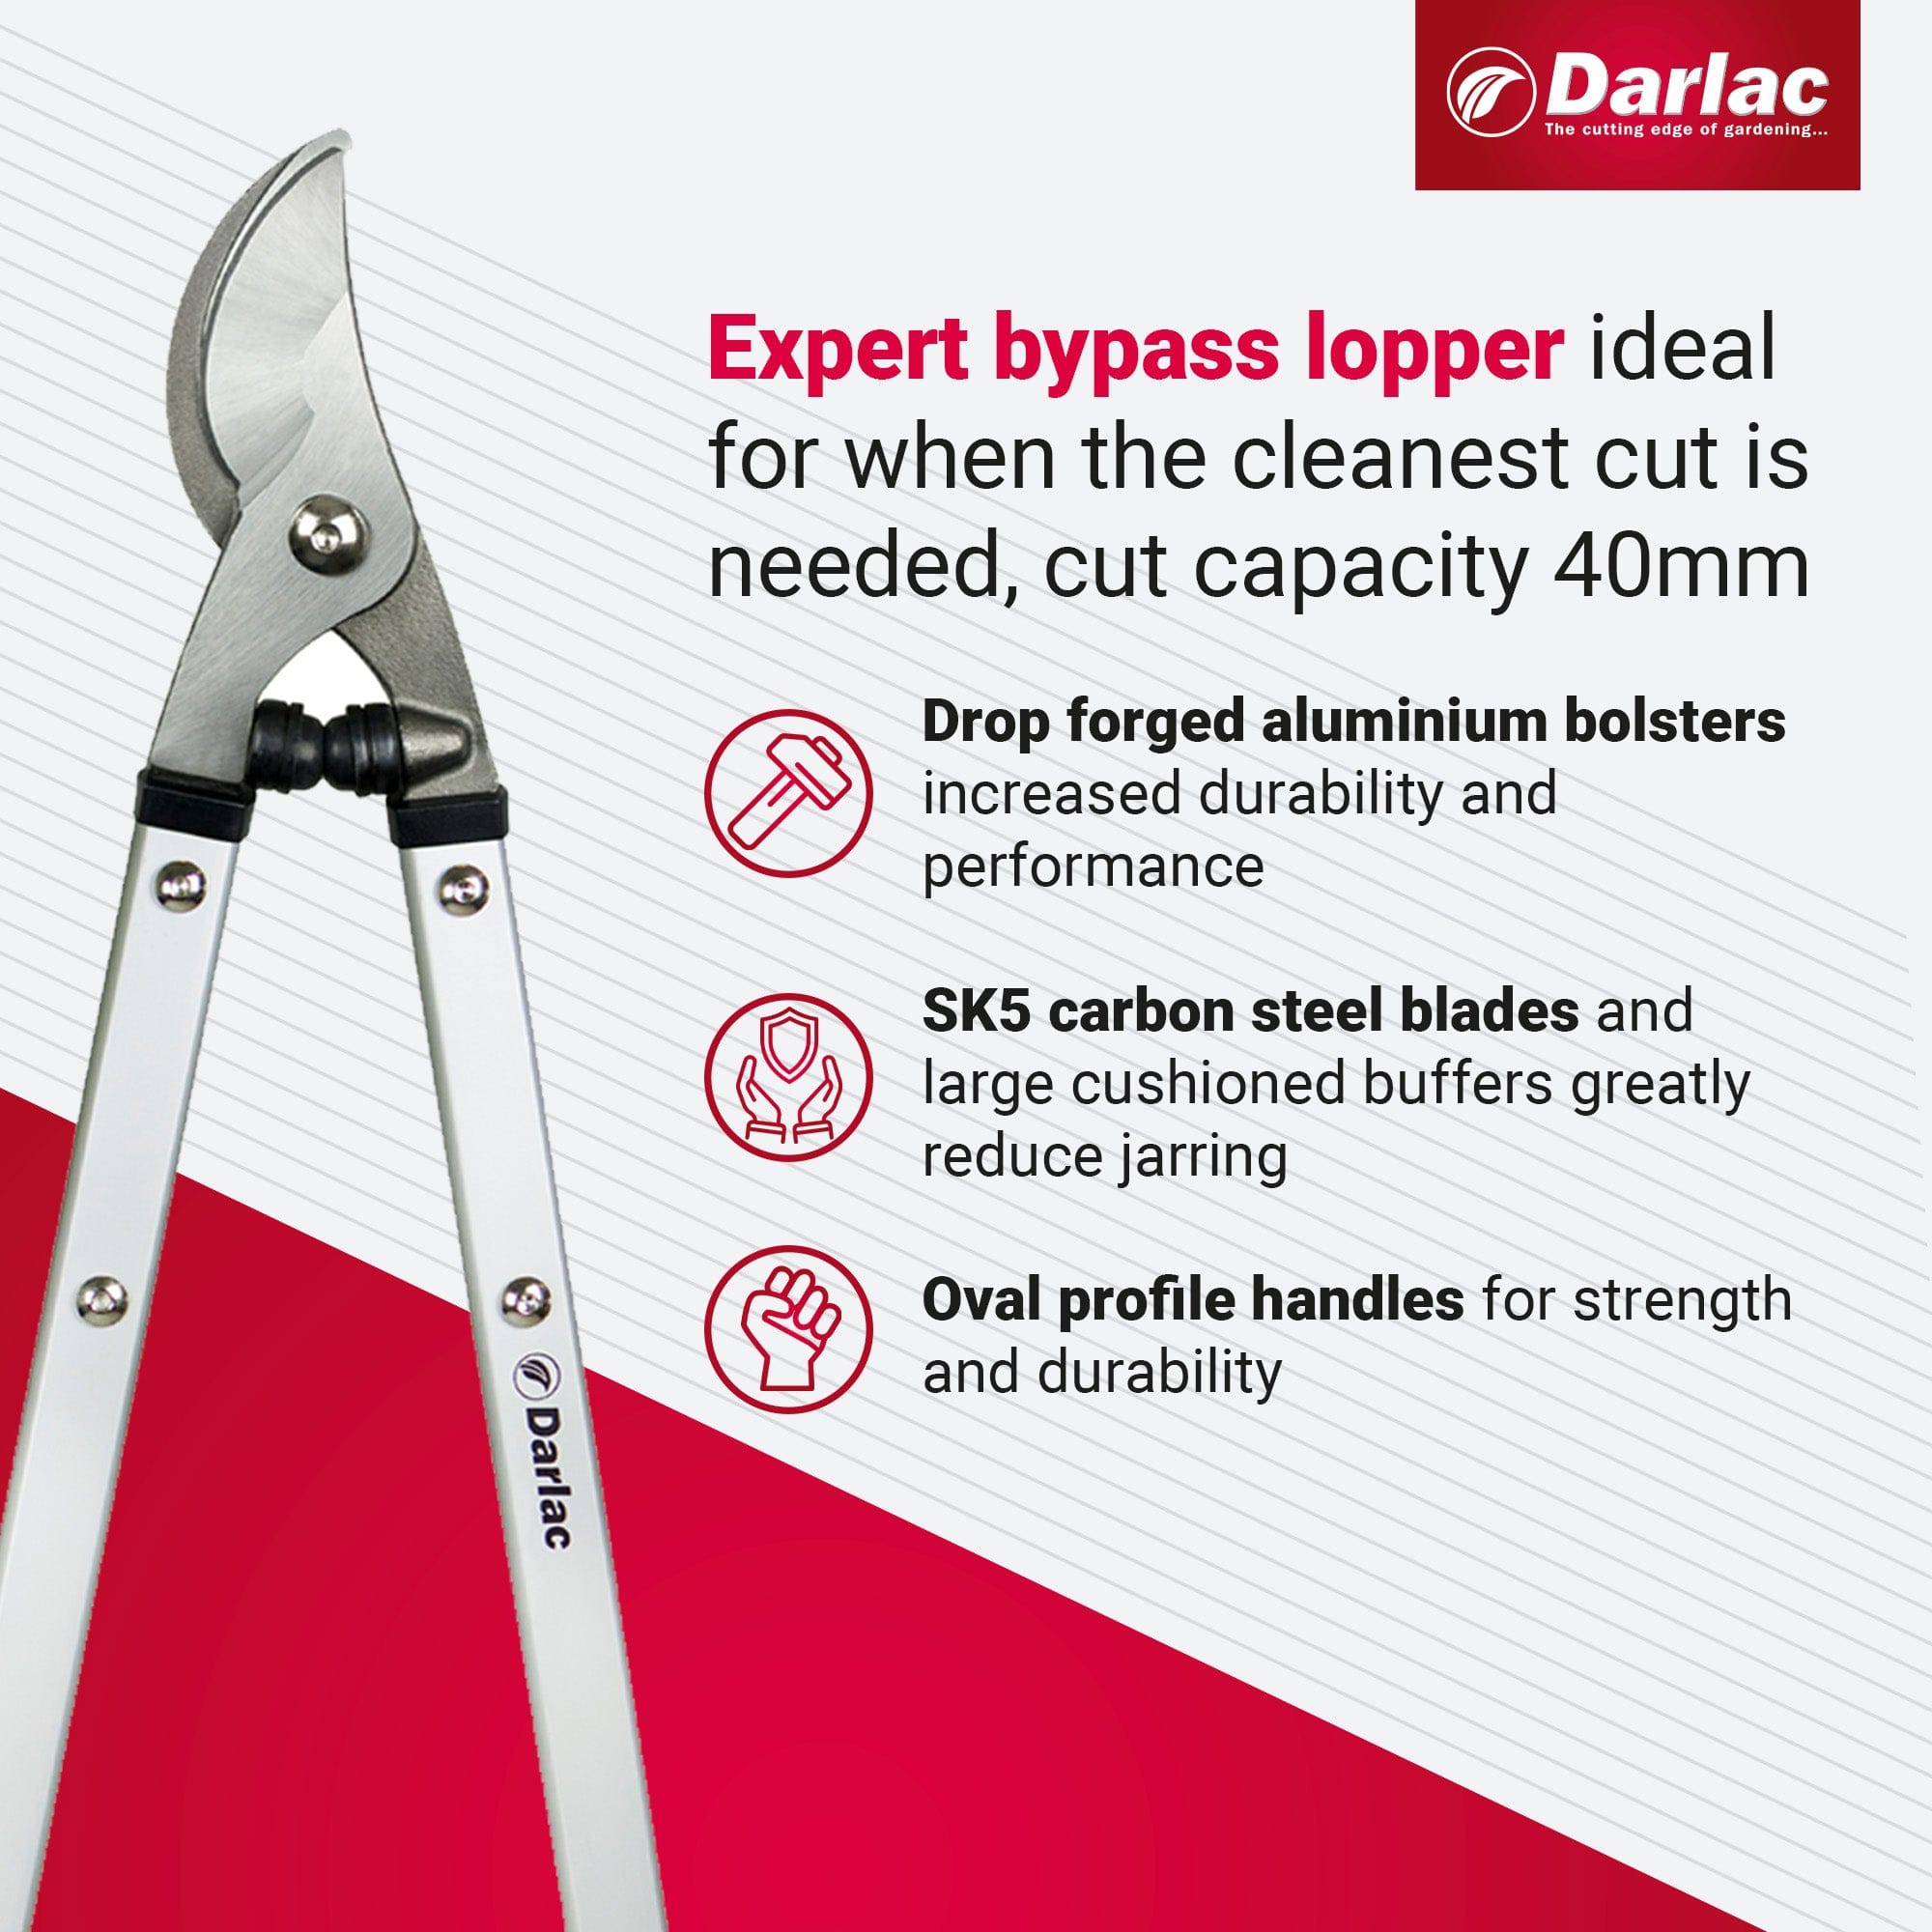 dt-brown HARDWARE Darlac Expert Bypass Lopper